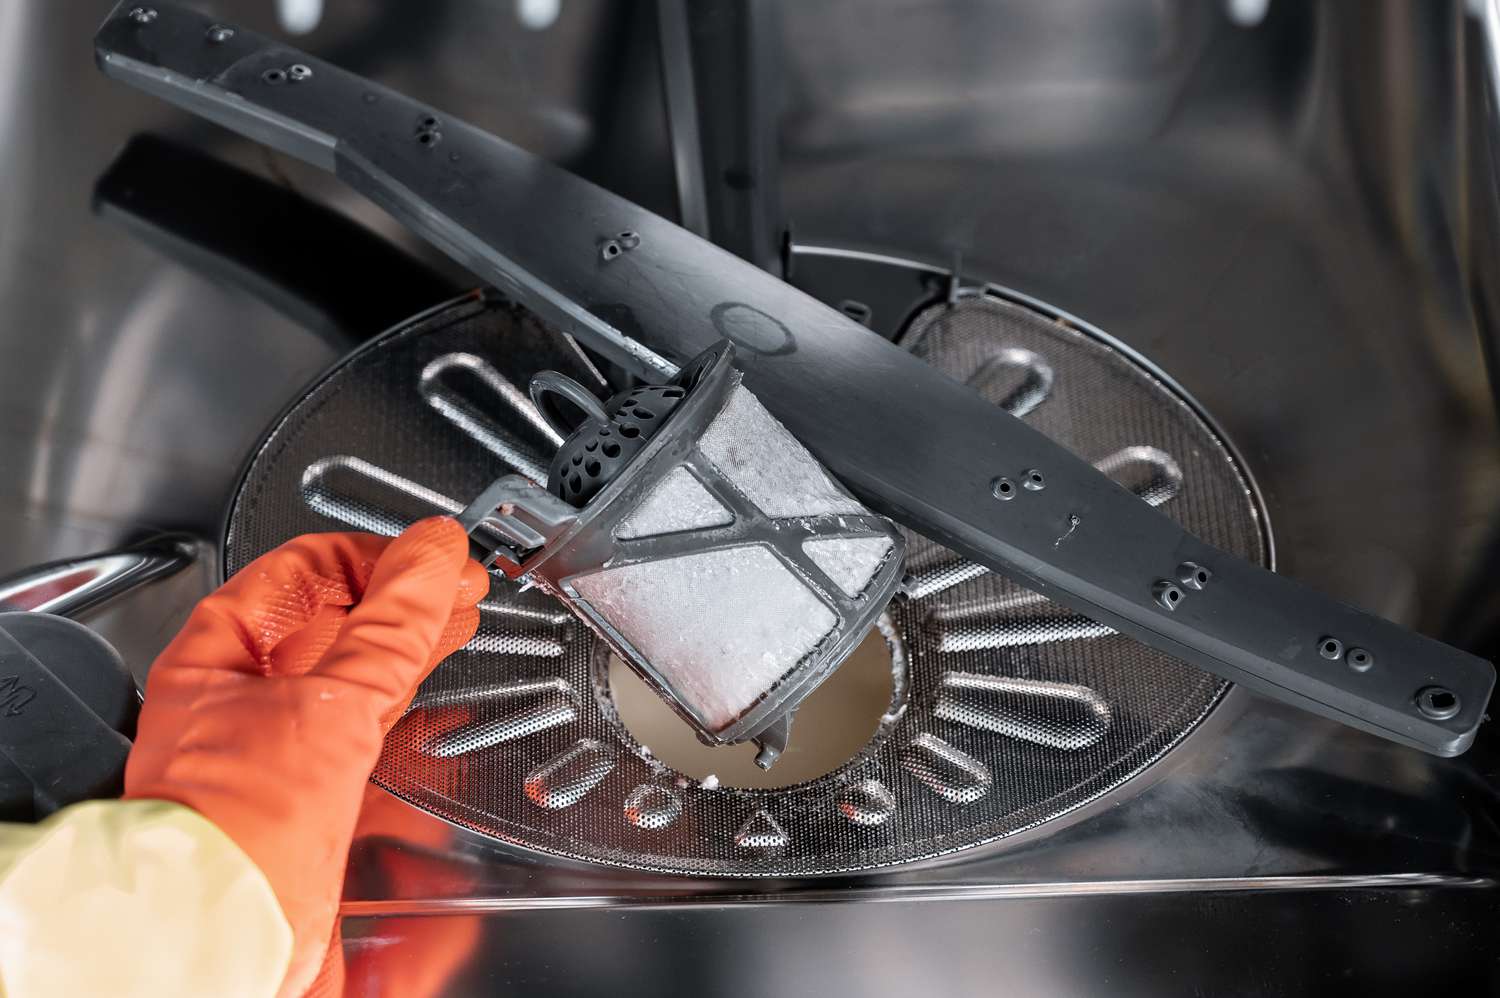 How To Clean The Dishwasher Filter